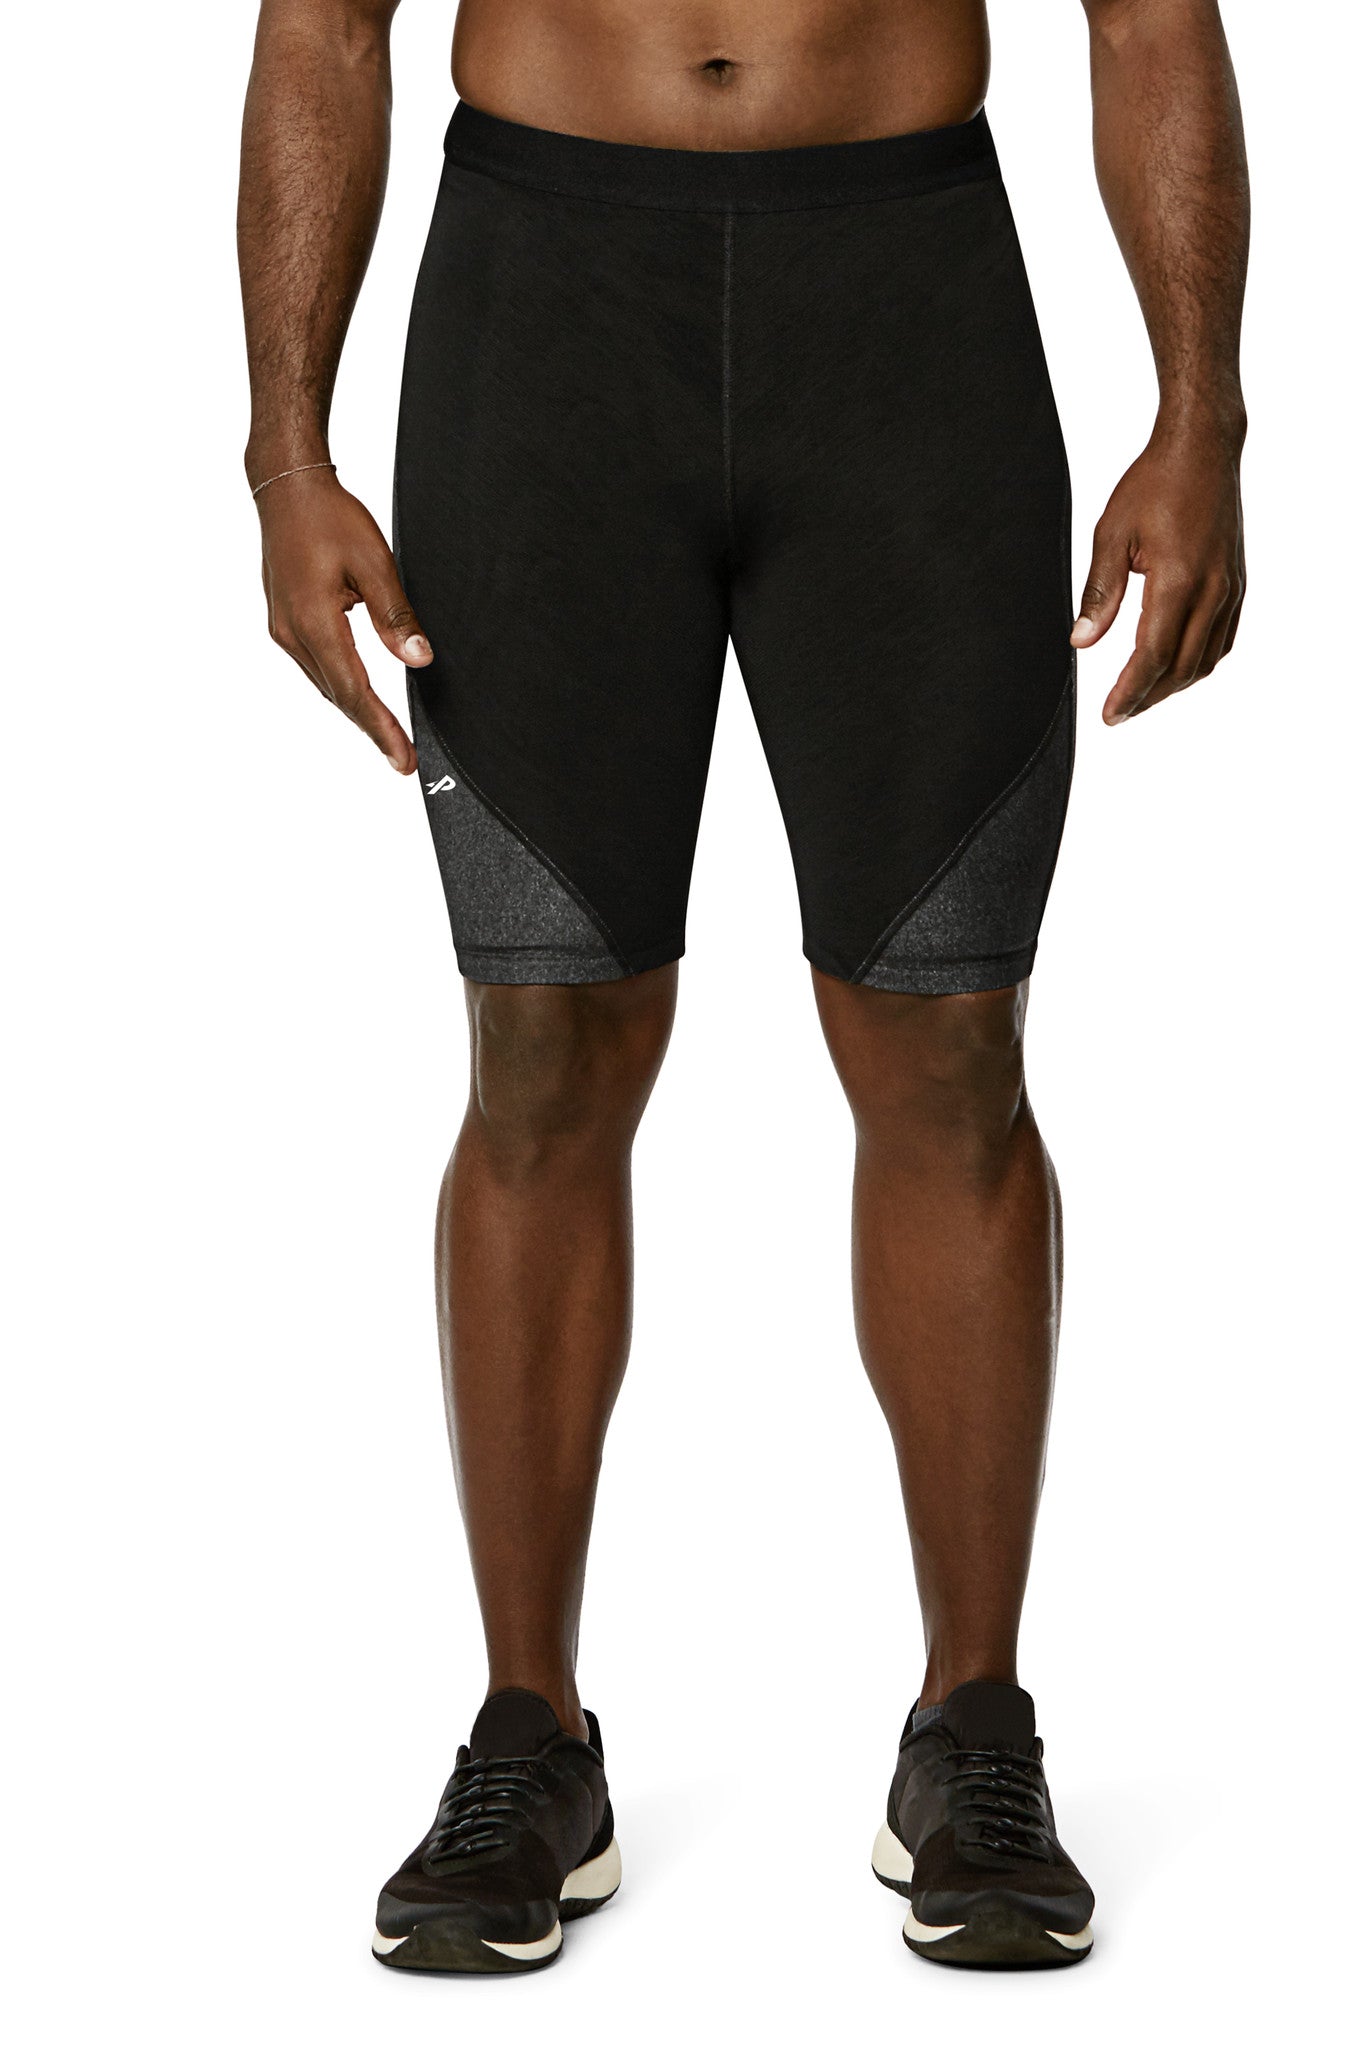 Physiclo Pro Resistance Men's Compression Full-Length Tight